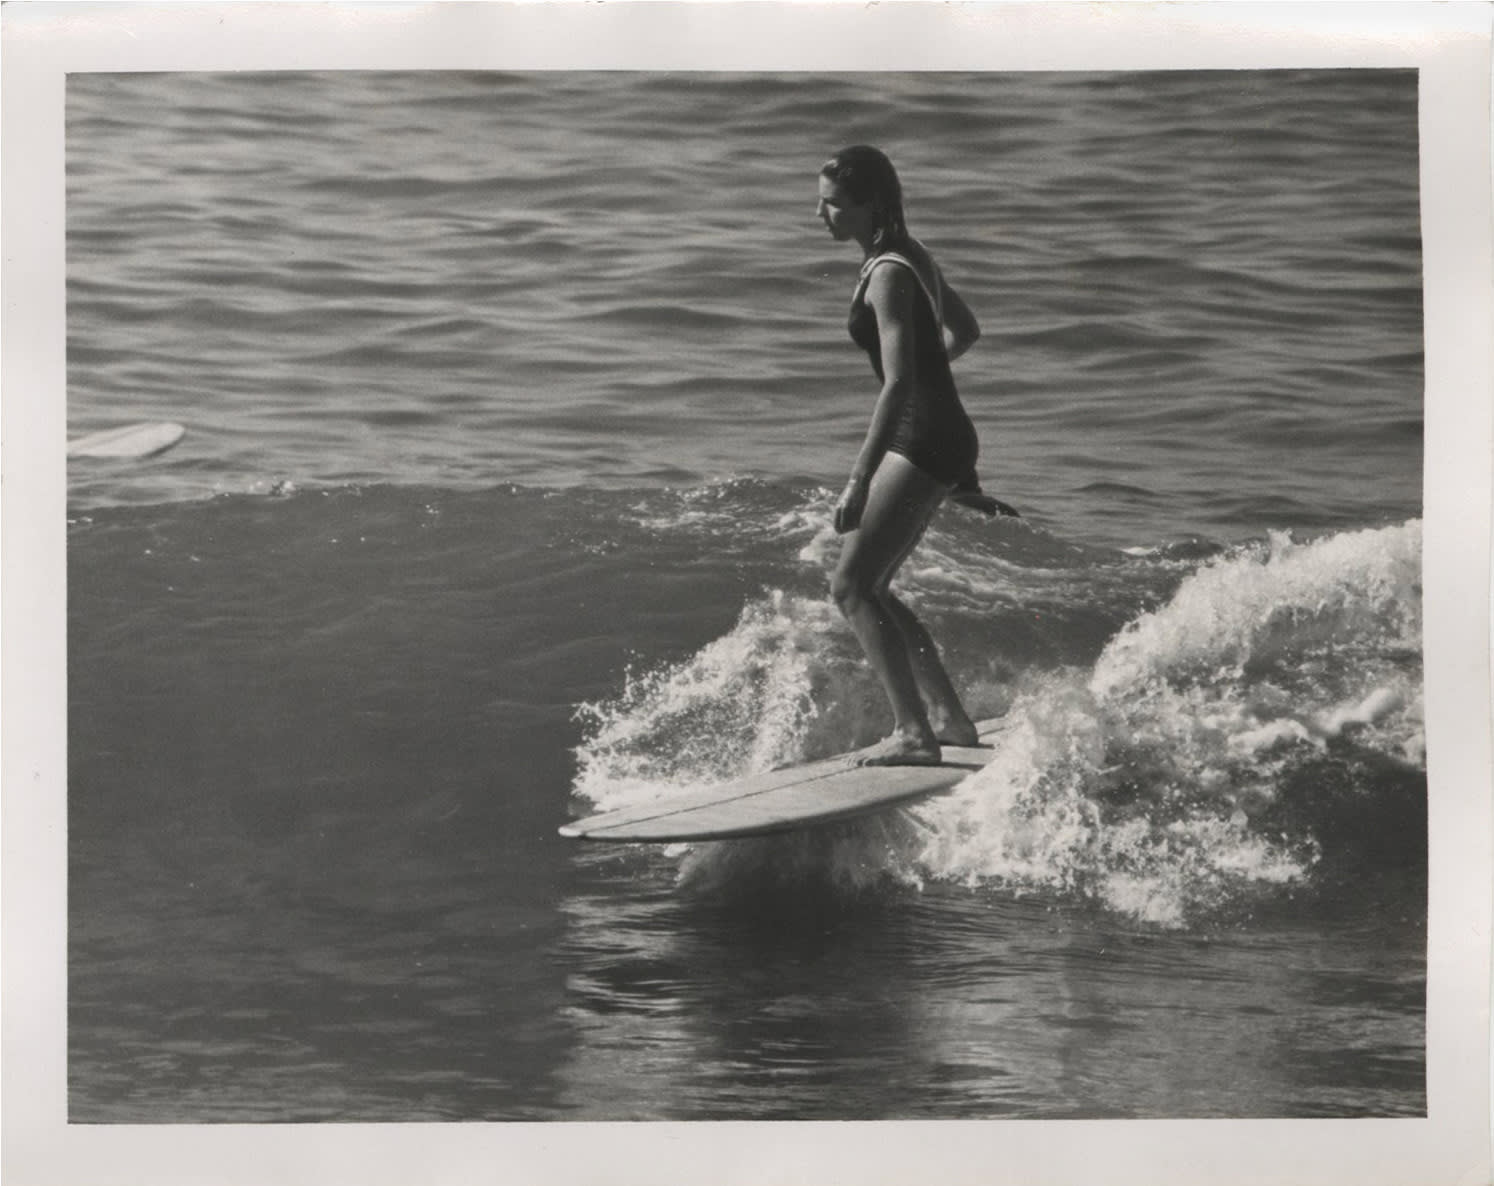 Leroy Grannis, Collection of Southern California Surfing Snaps